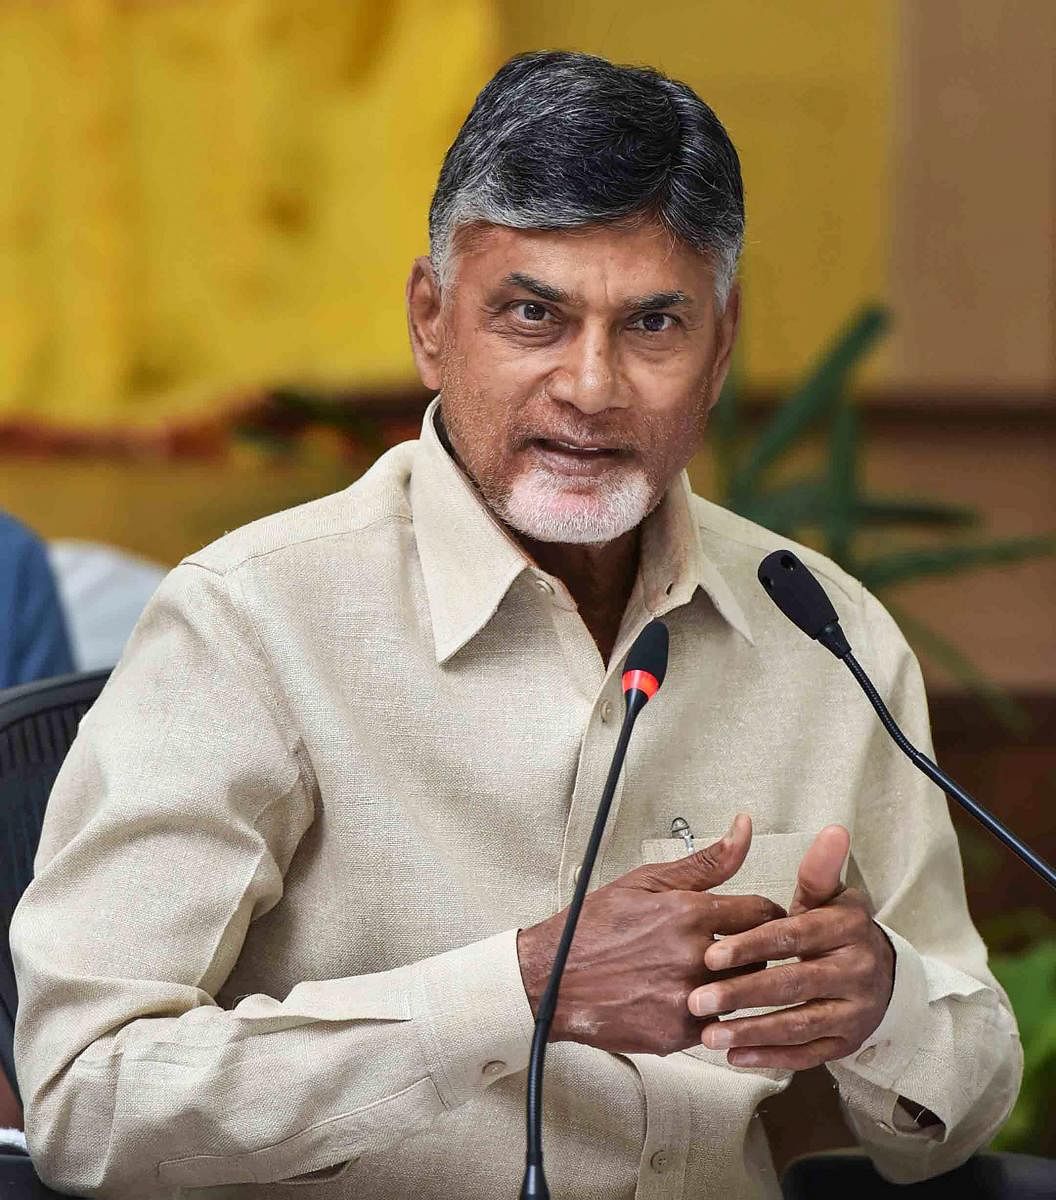 TDP chief and Andhra Pradesh Chief Minister N Chandrababu Naidu on Saturday cited the tension in Kerala over the entry of women of menstruating age into the Sabarimala temple to accuse the BJP of creating "strife" in temples across the country. PTI file p